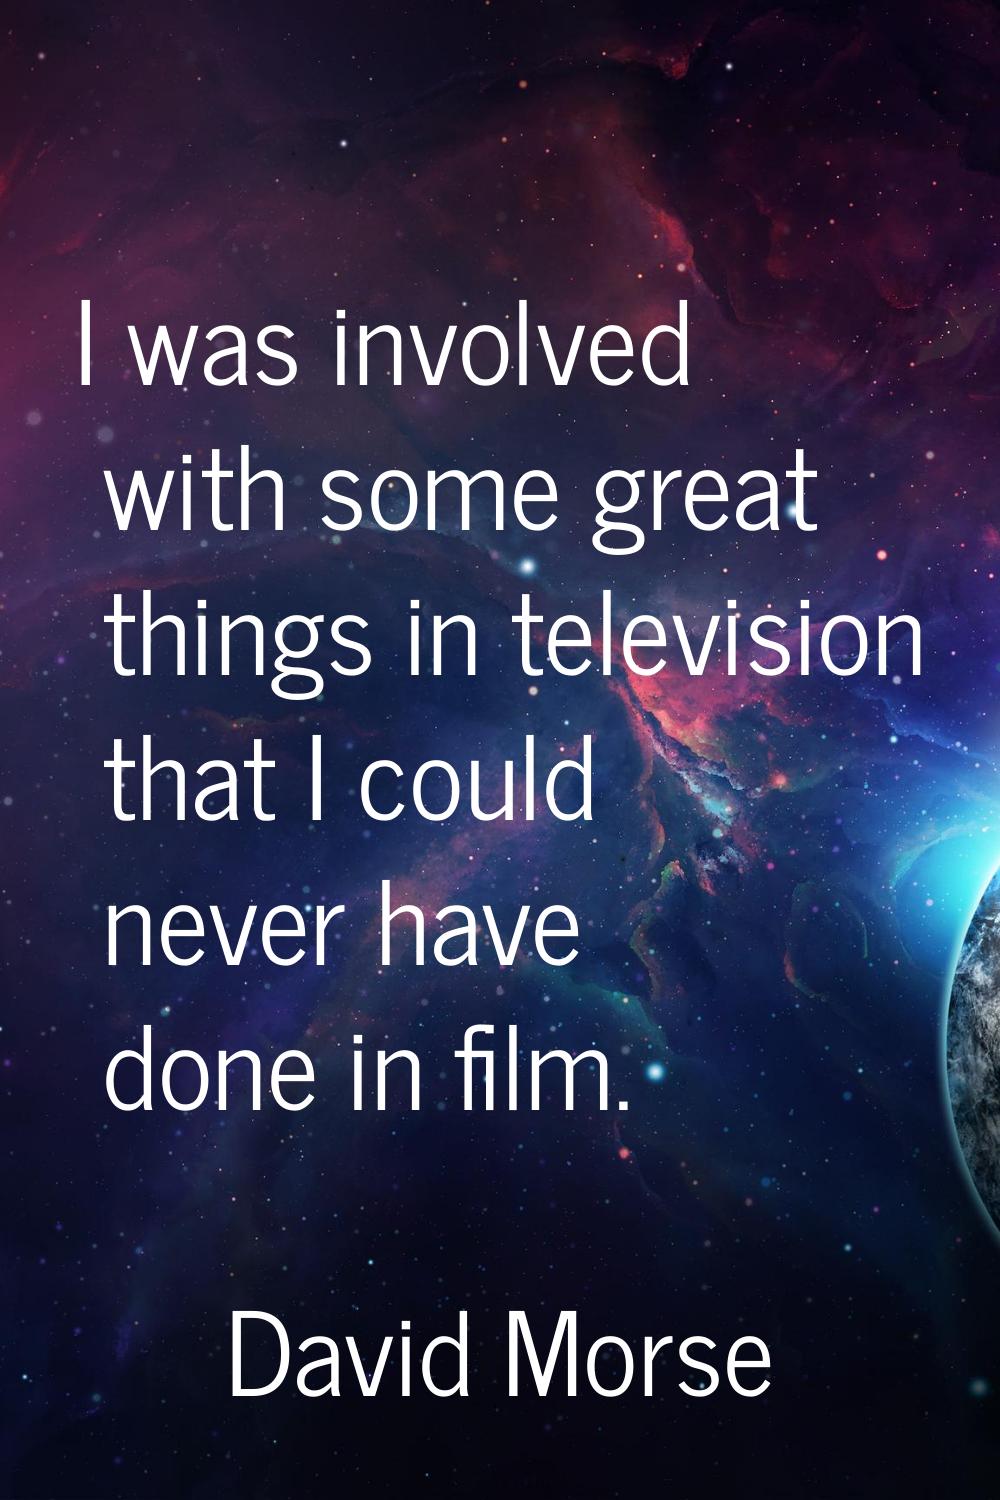 I was involved with some great things in television that I could never have done in film.